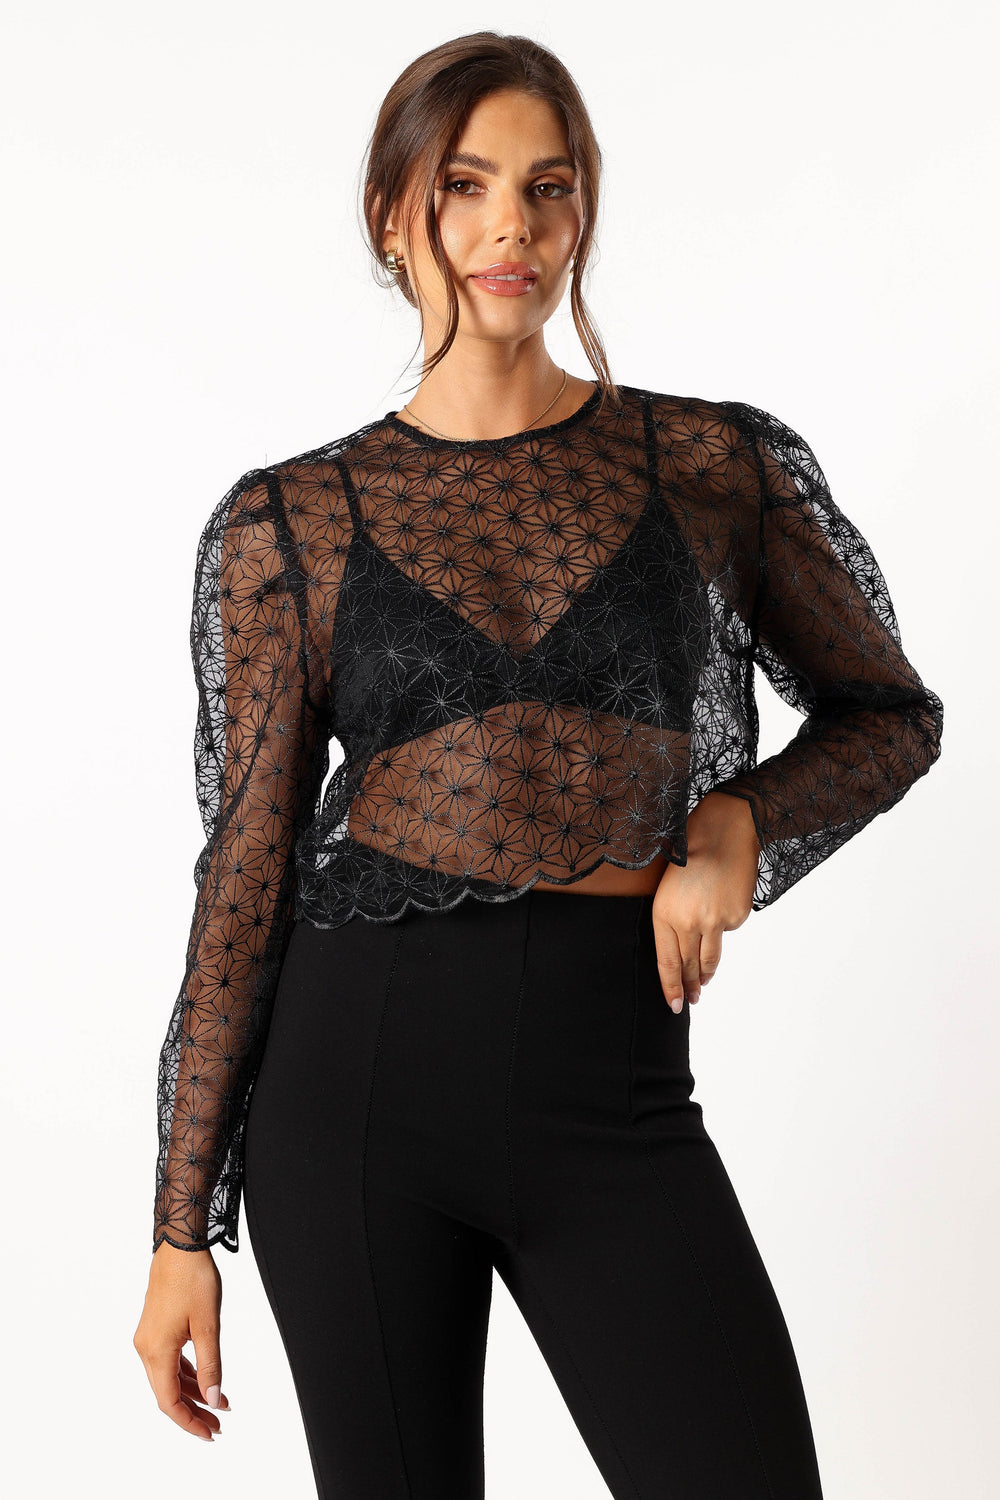 Petal and Pup USA TOPS Gwen Embellished Top - Black